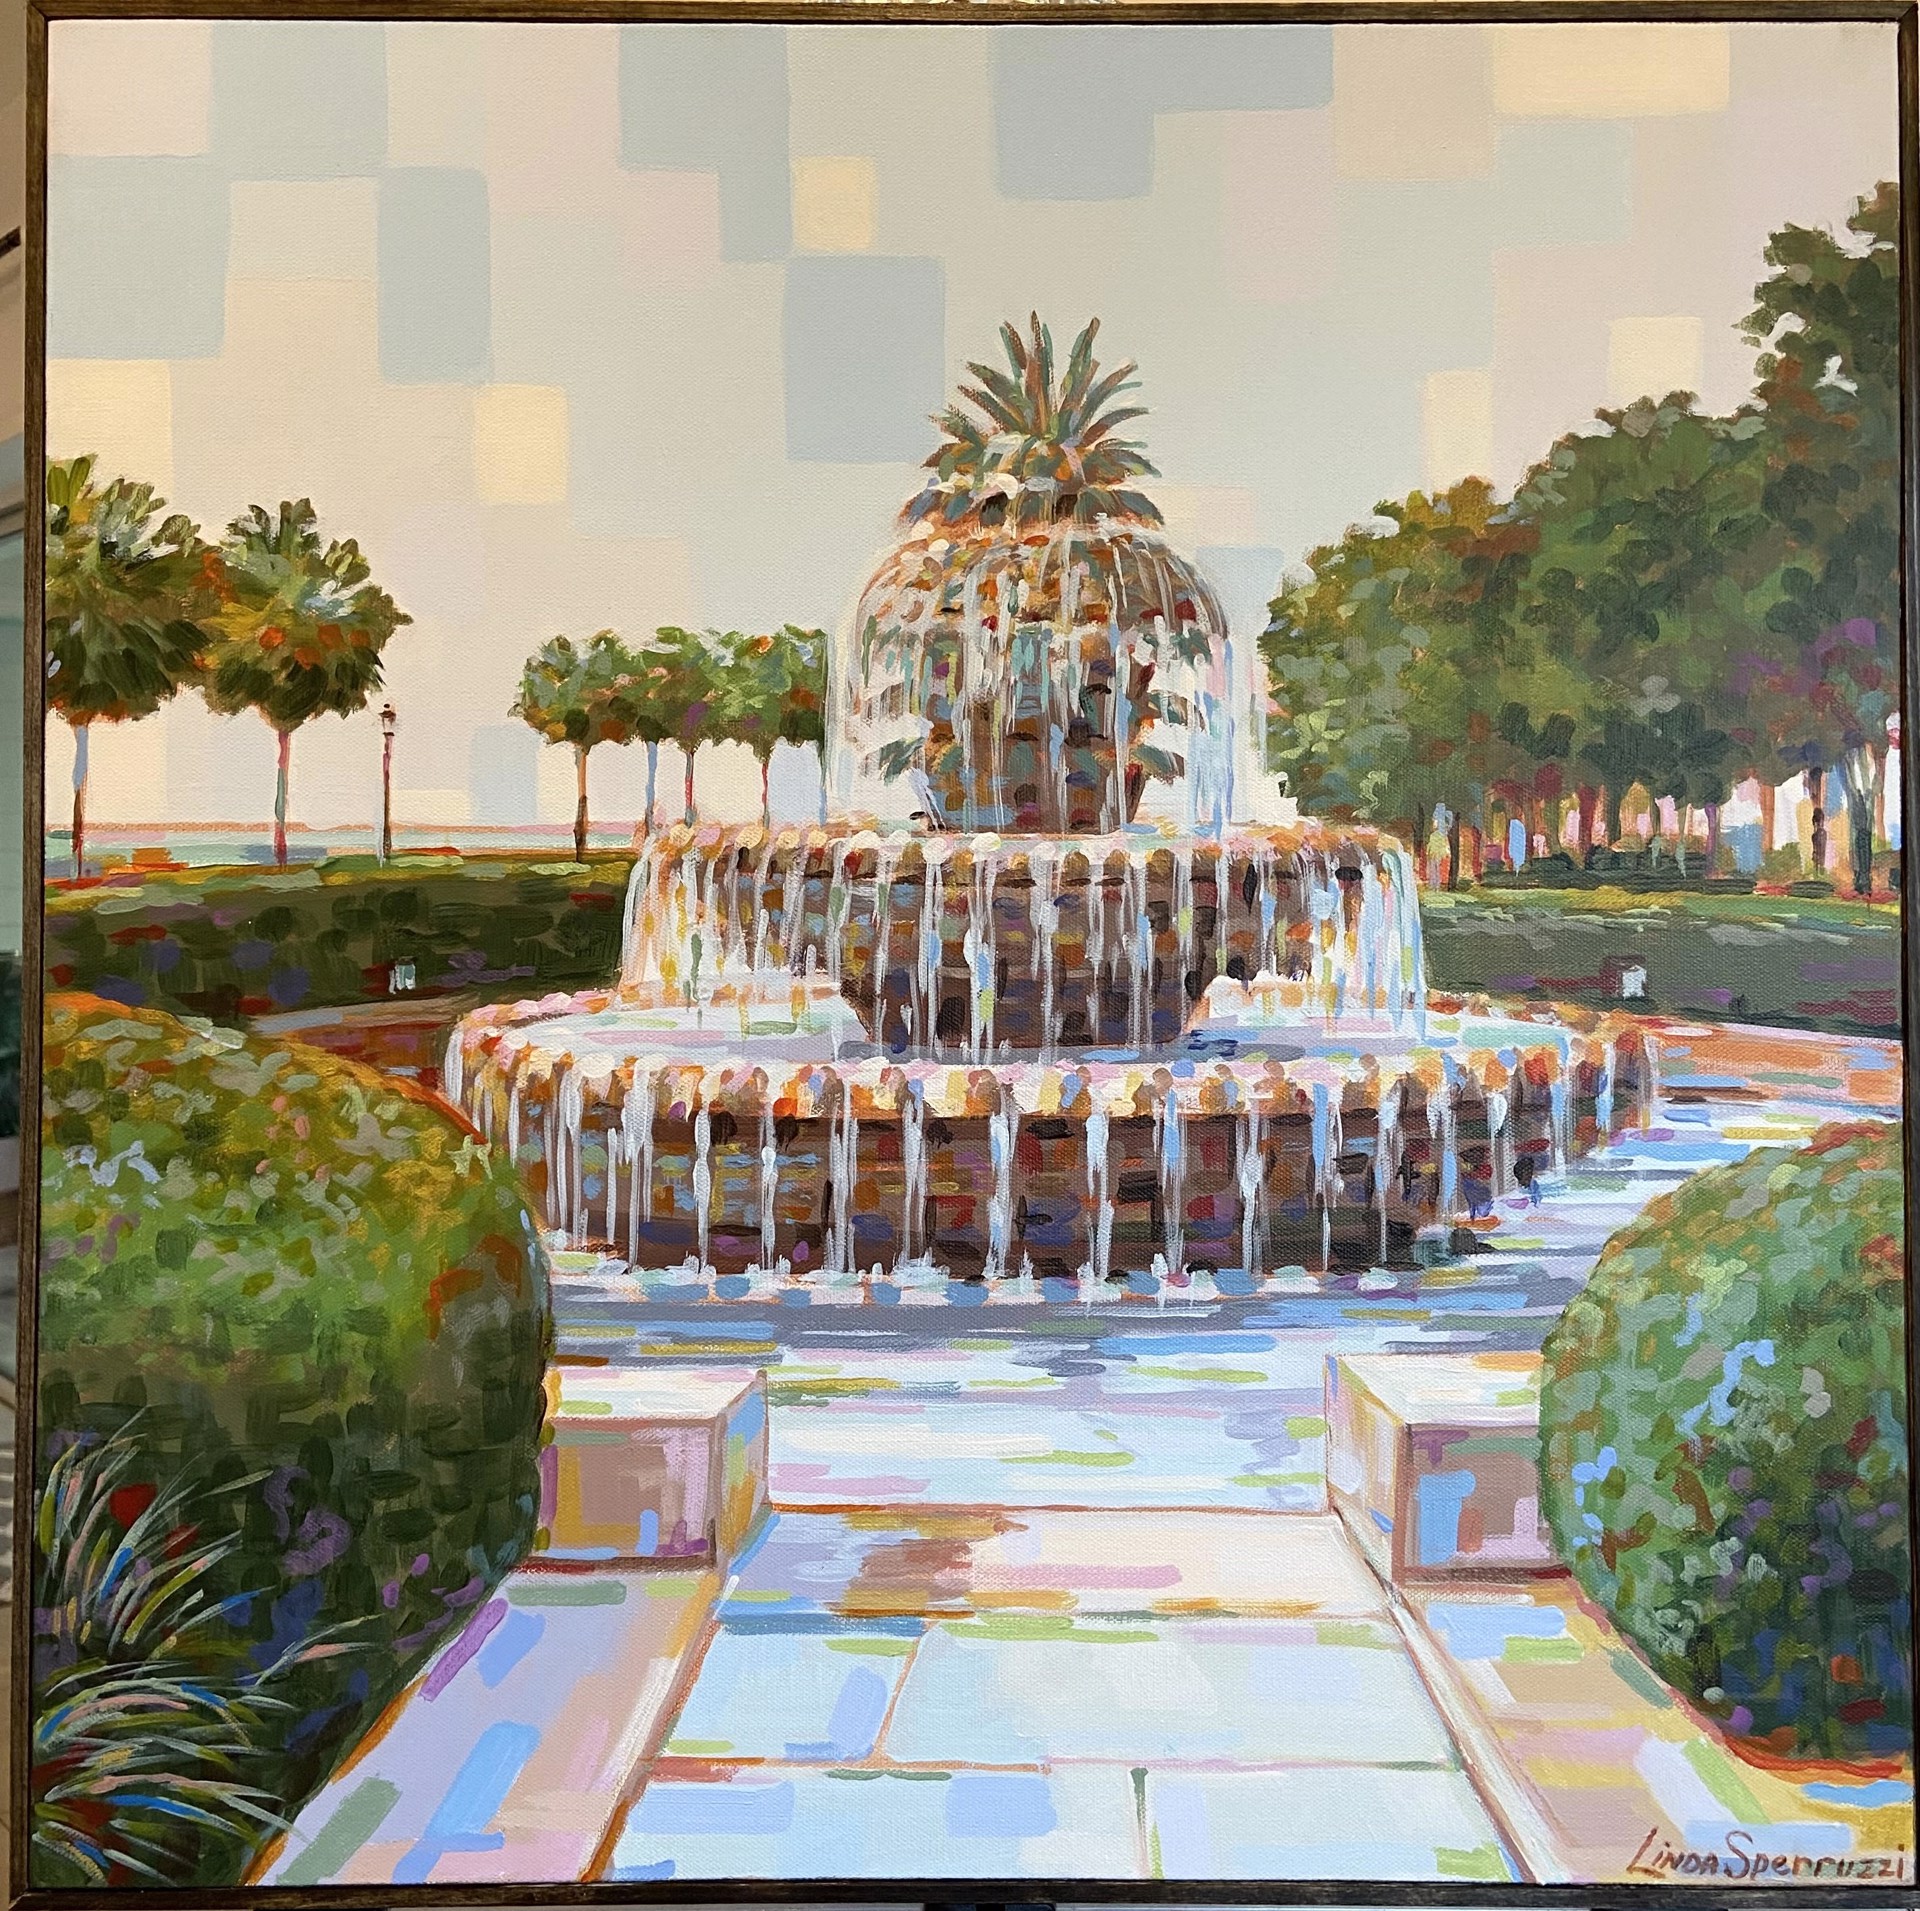 The Colors of The Pineapple Fountain by Linda Sperruzzi